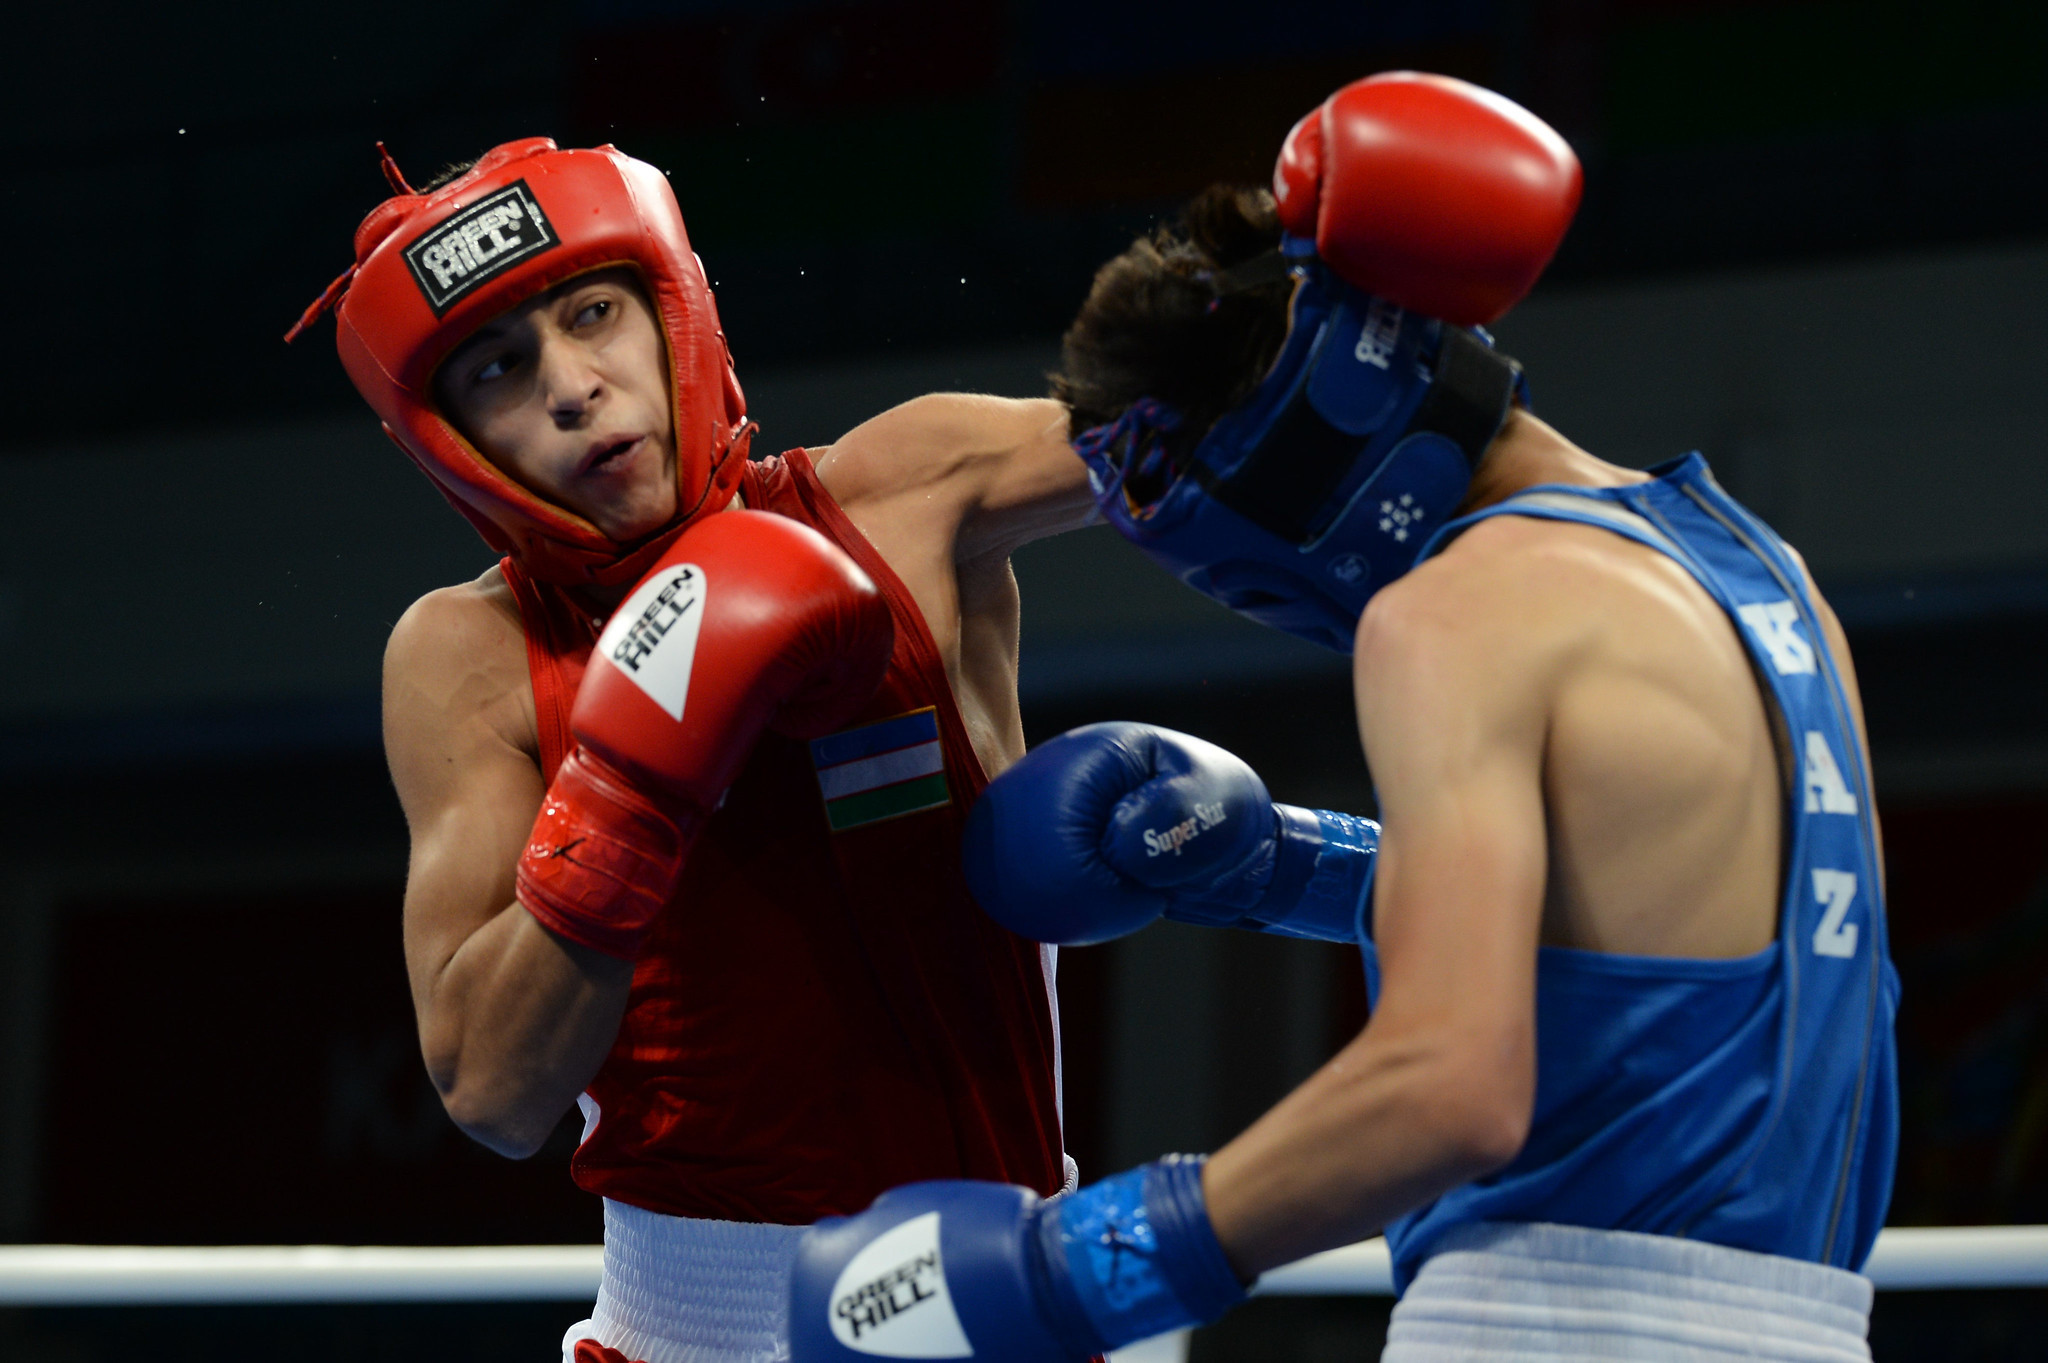 Kazakhstan has started strongly in the boxing event at the Games of the CIS Countries ©DSCP/Flickr